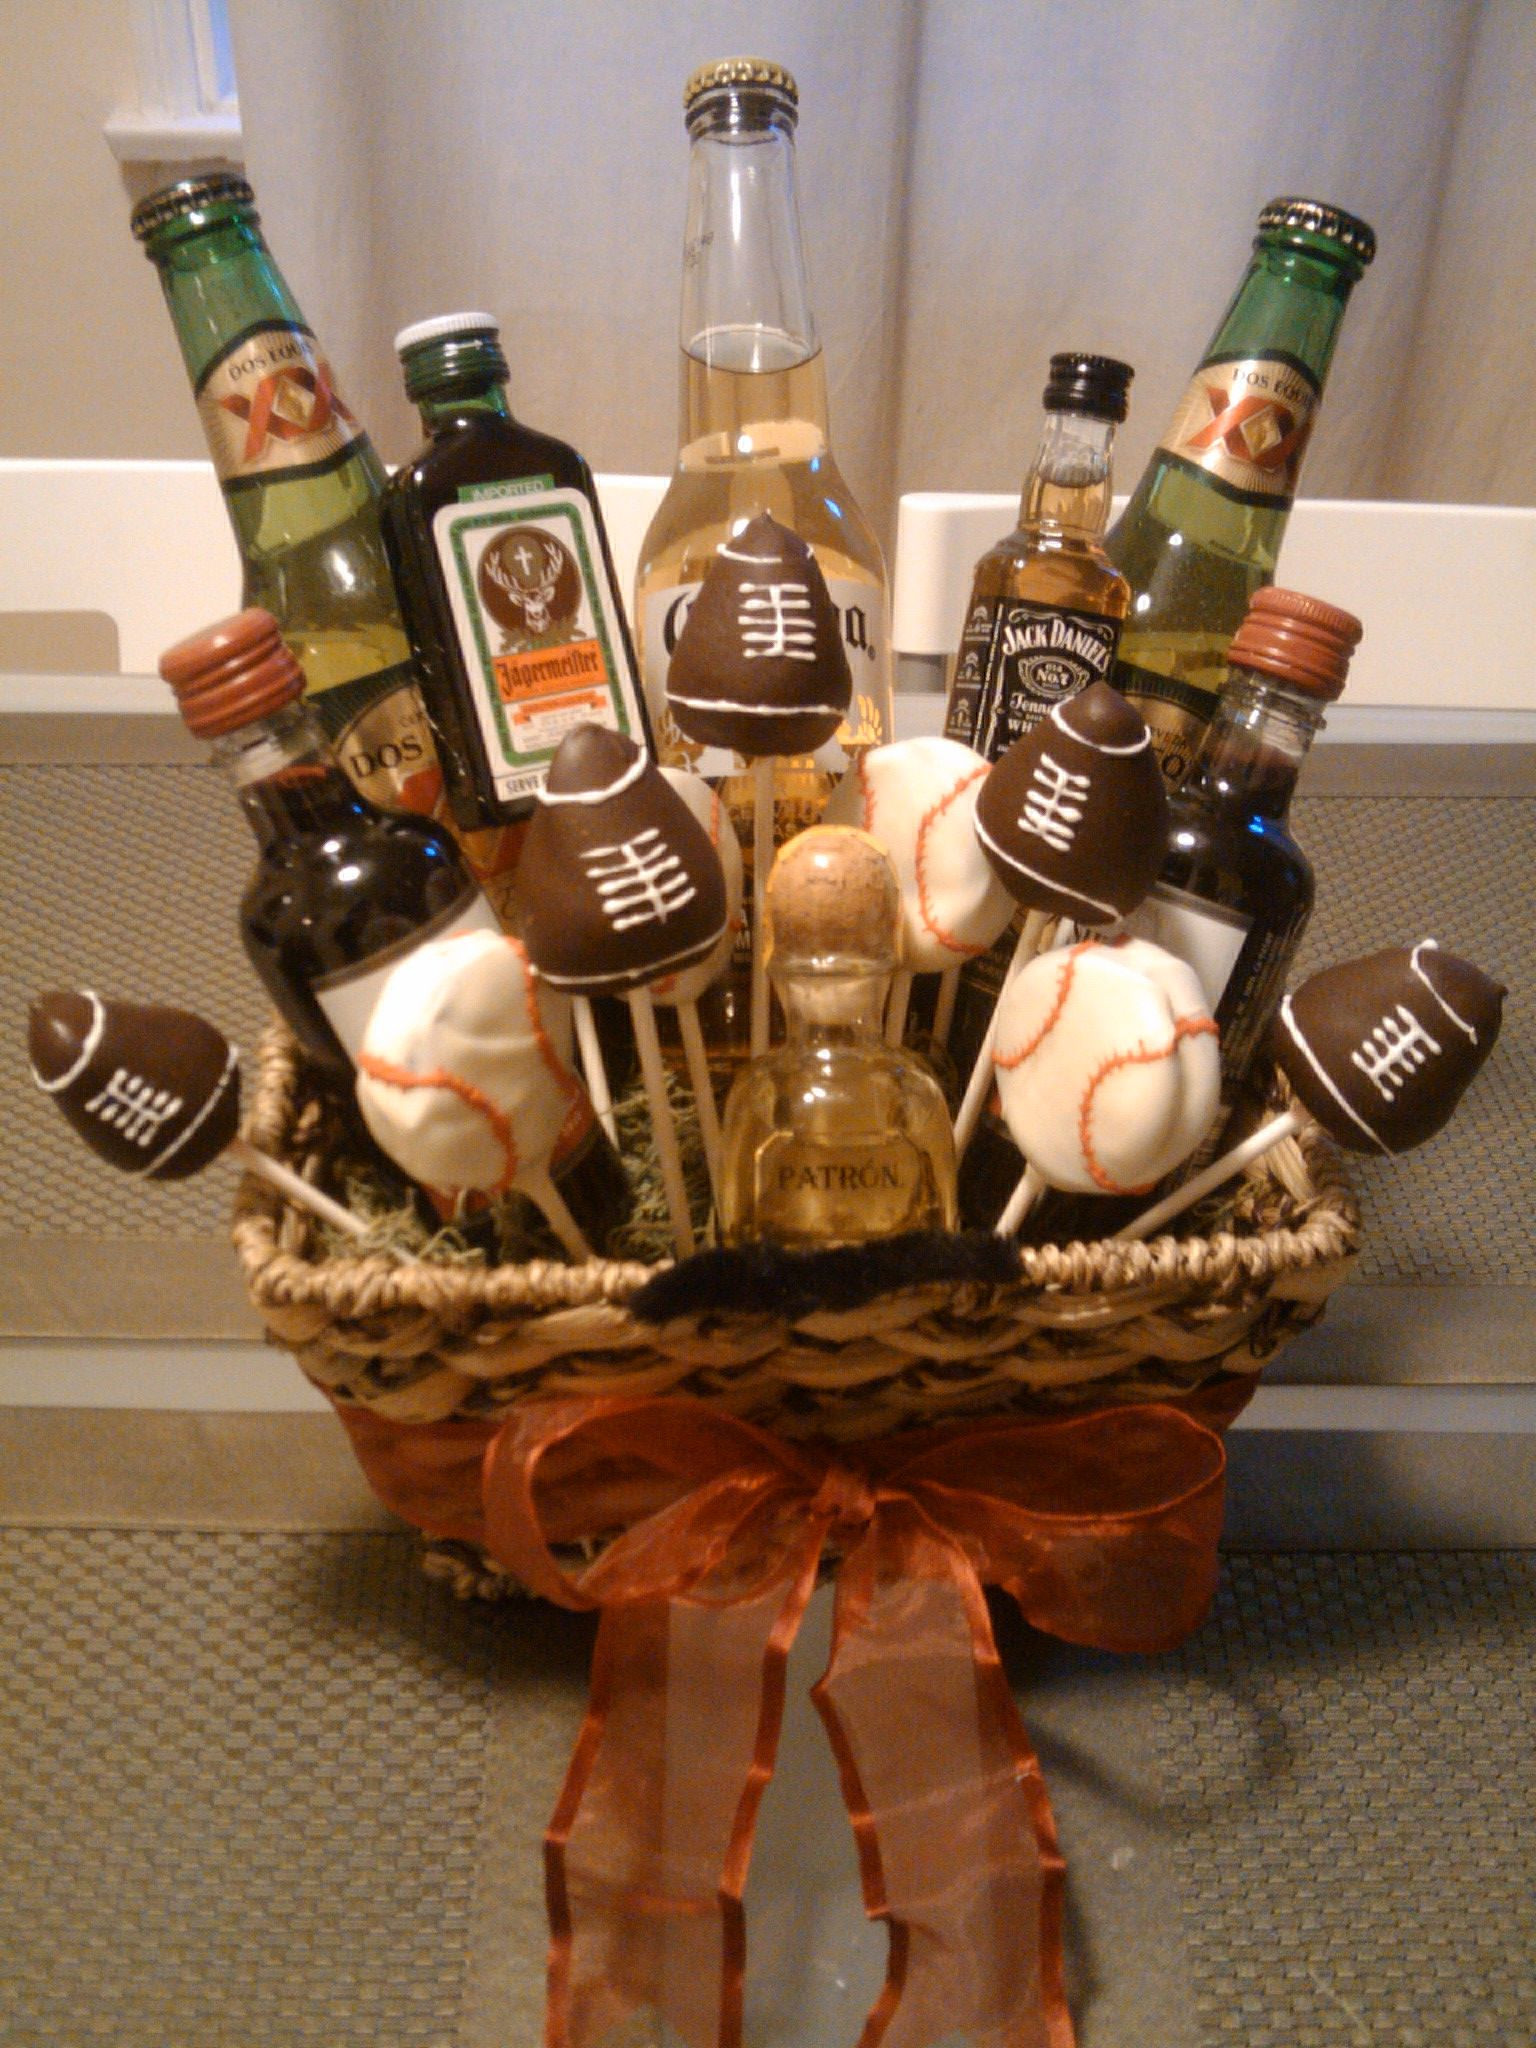 Manly Valentine Gift Ideas
 man bouquet this is a cute valentines day idea or